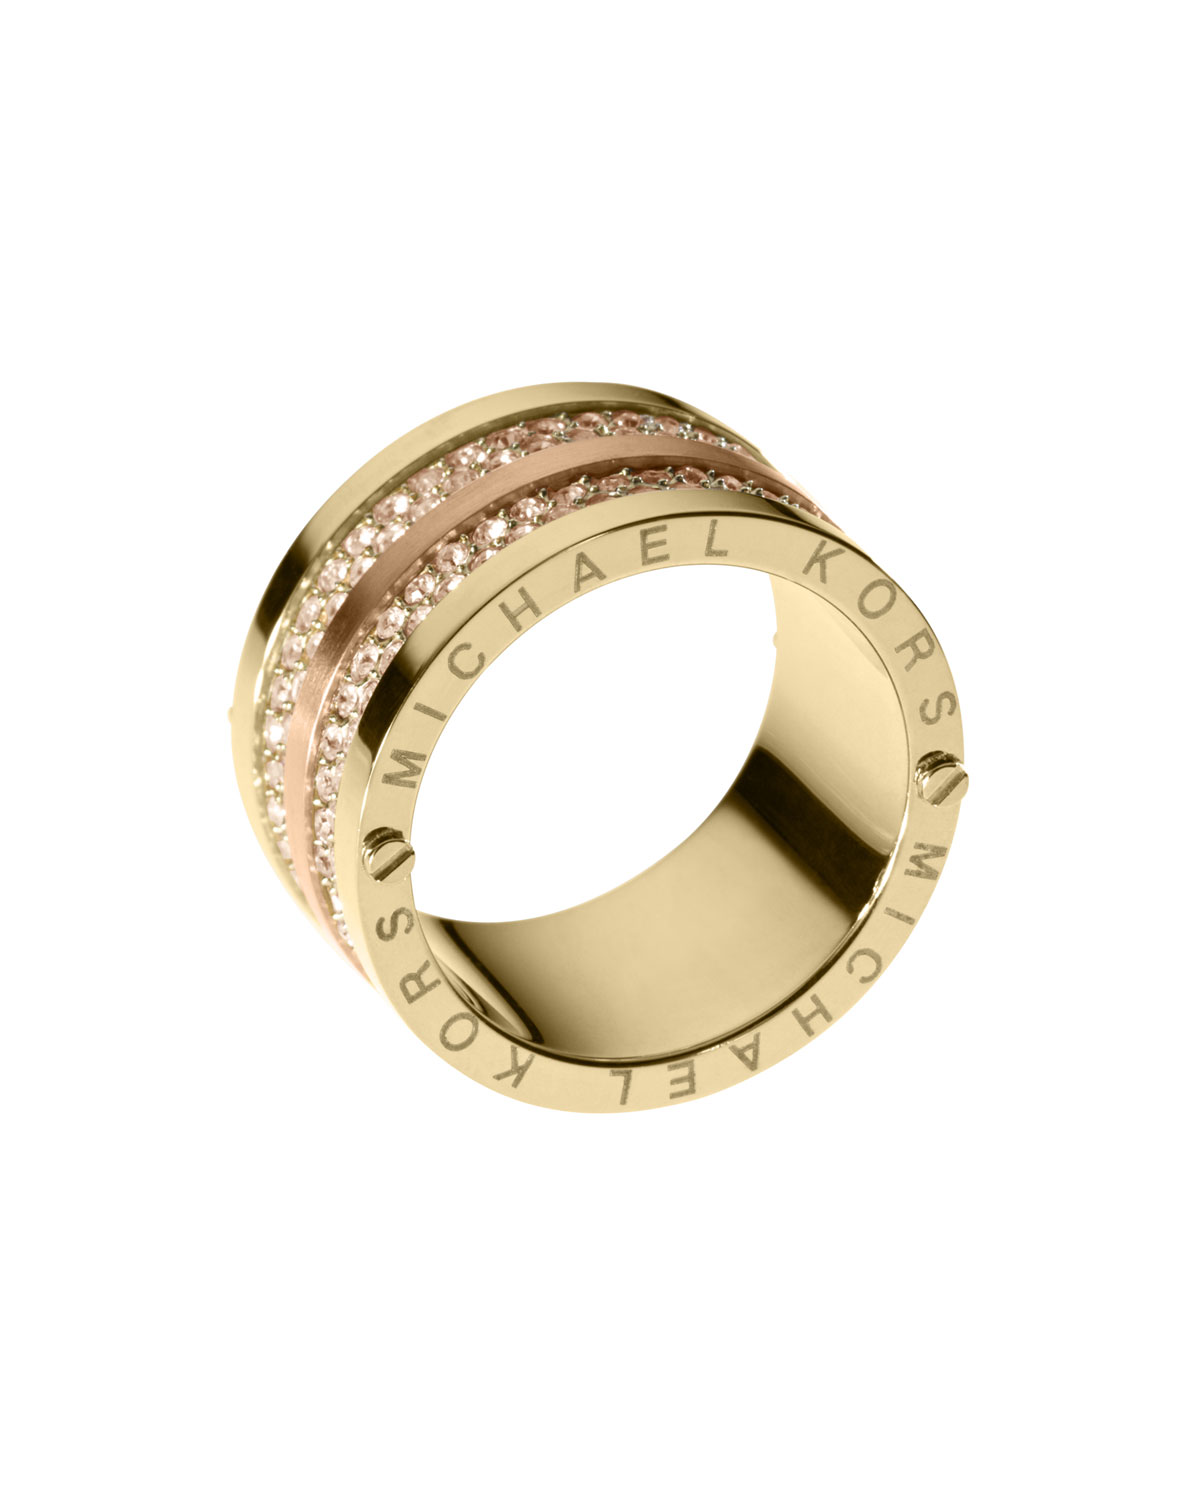 Michael Kors Pave Barrel Band Ring in Gold (6)